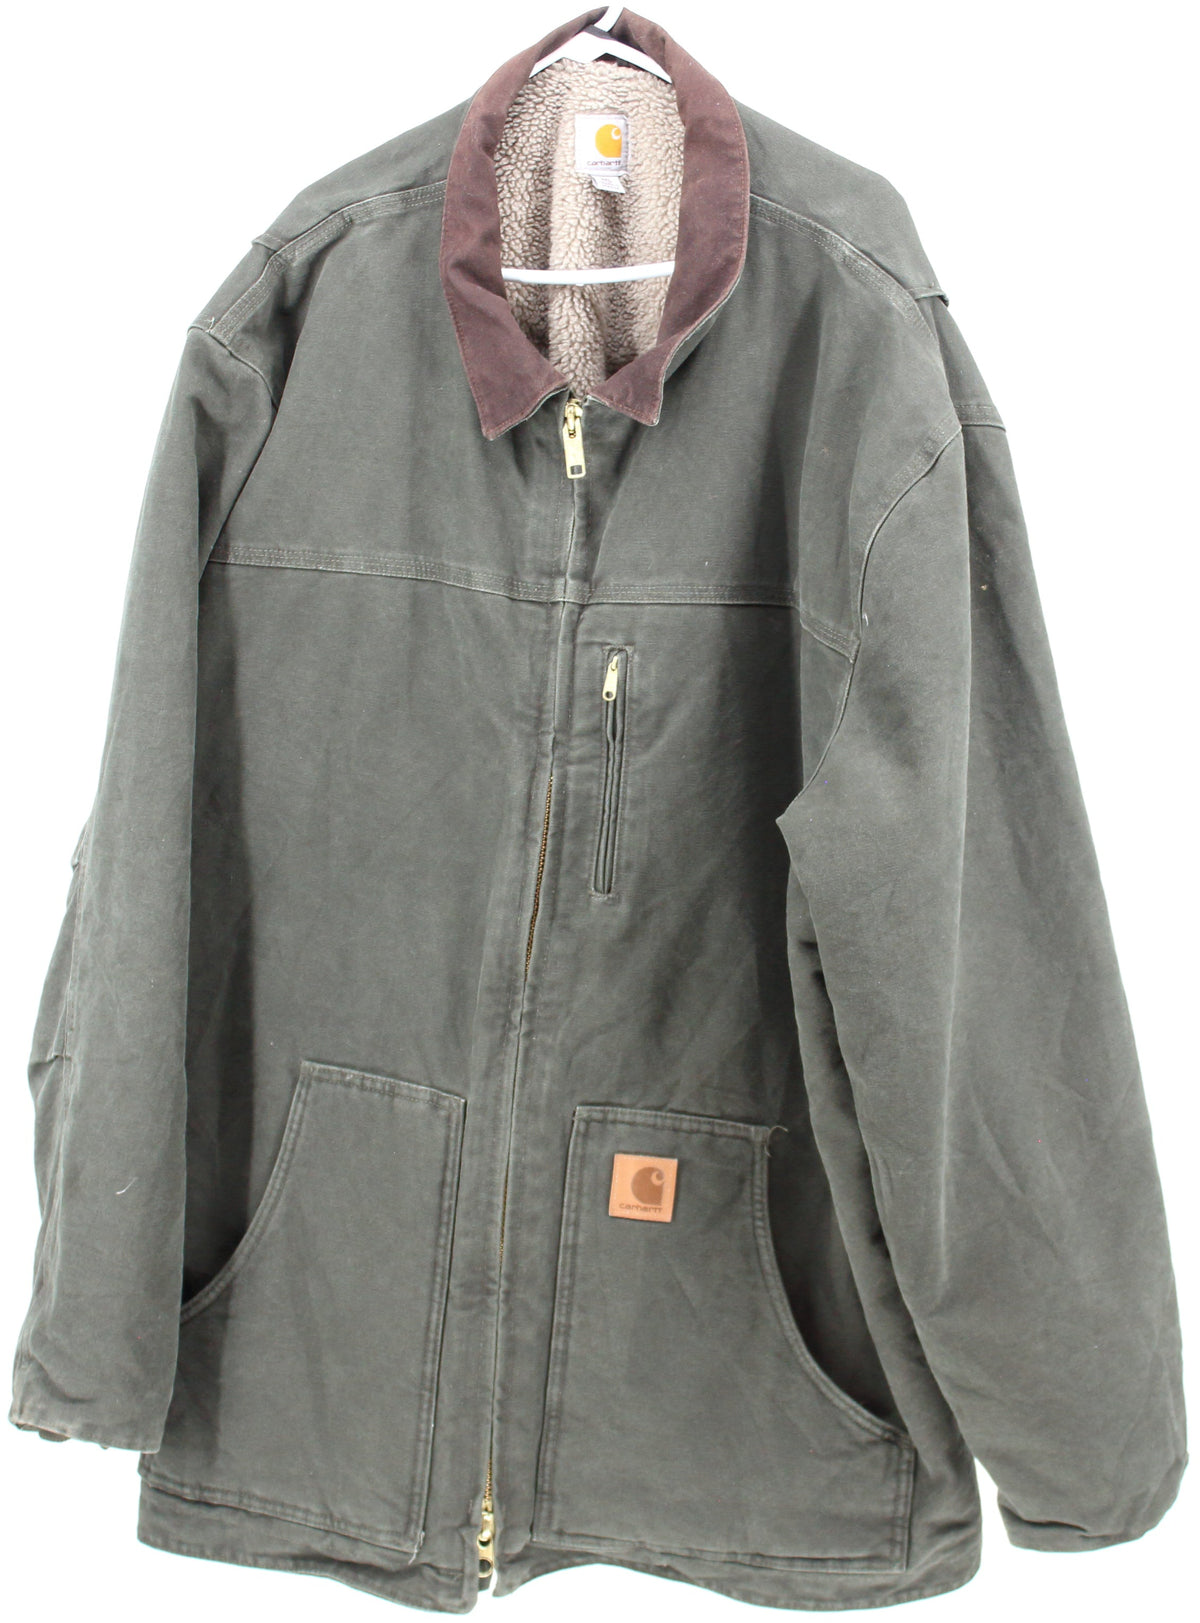 Carhartt Green Jacket With Brown Collar